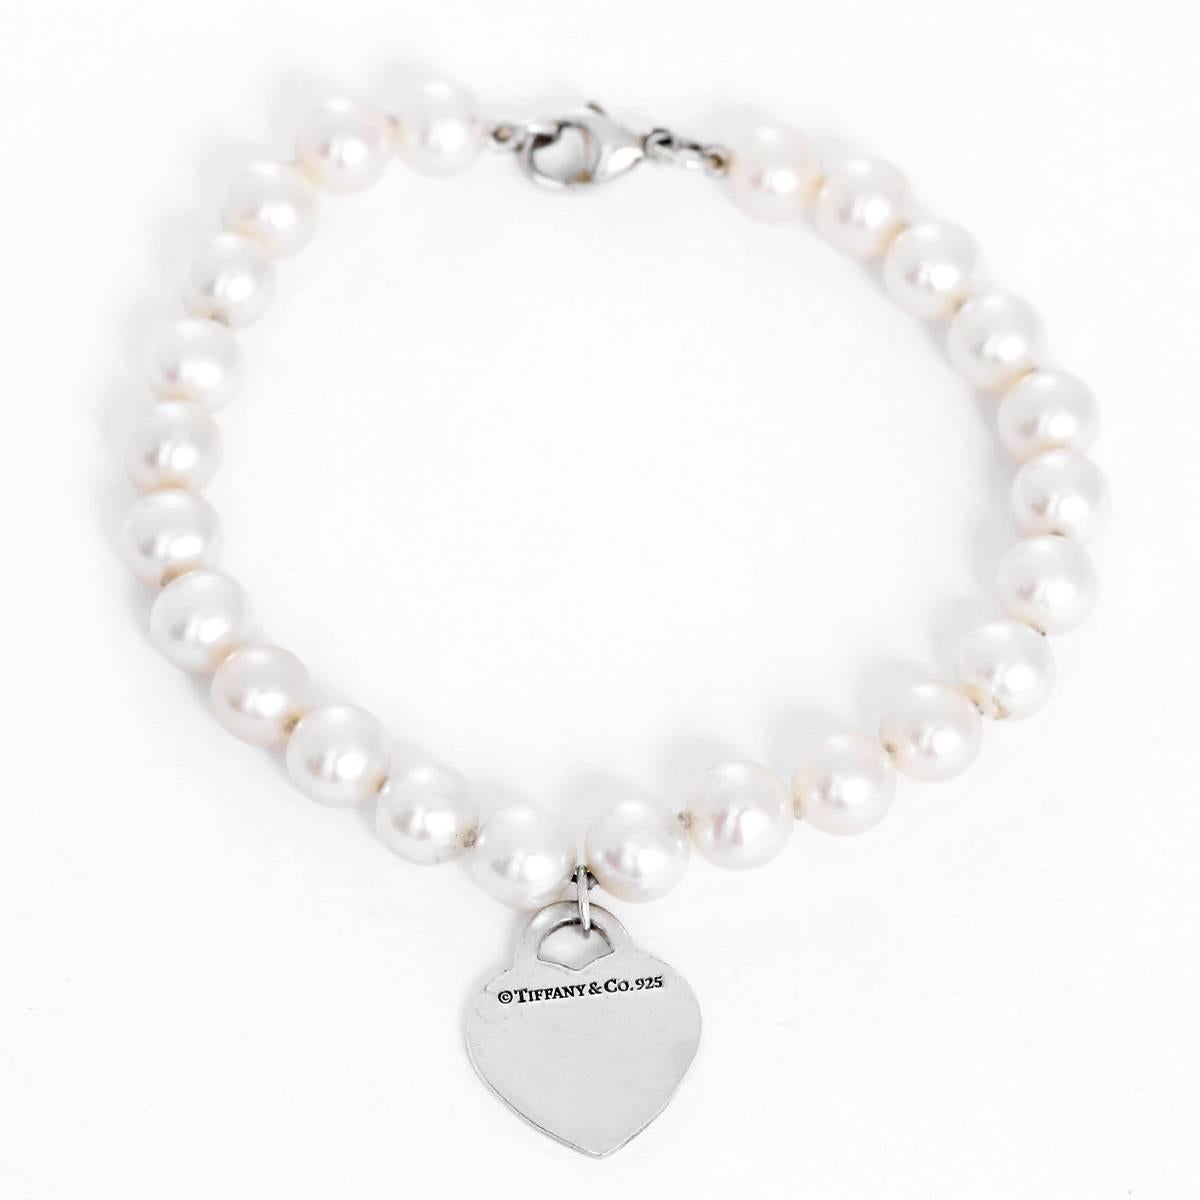 This Return to Tiffany bracelet features pearls with a sterling silver heart tag. Bracelet measures apx. 7-inches in length. Total weight is 15.4 grams.